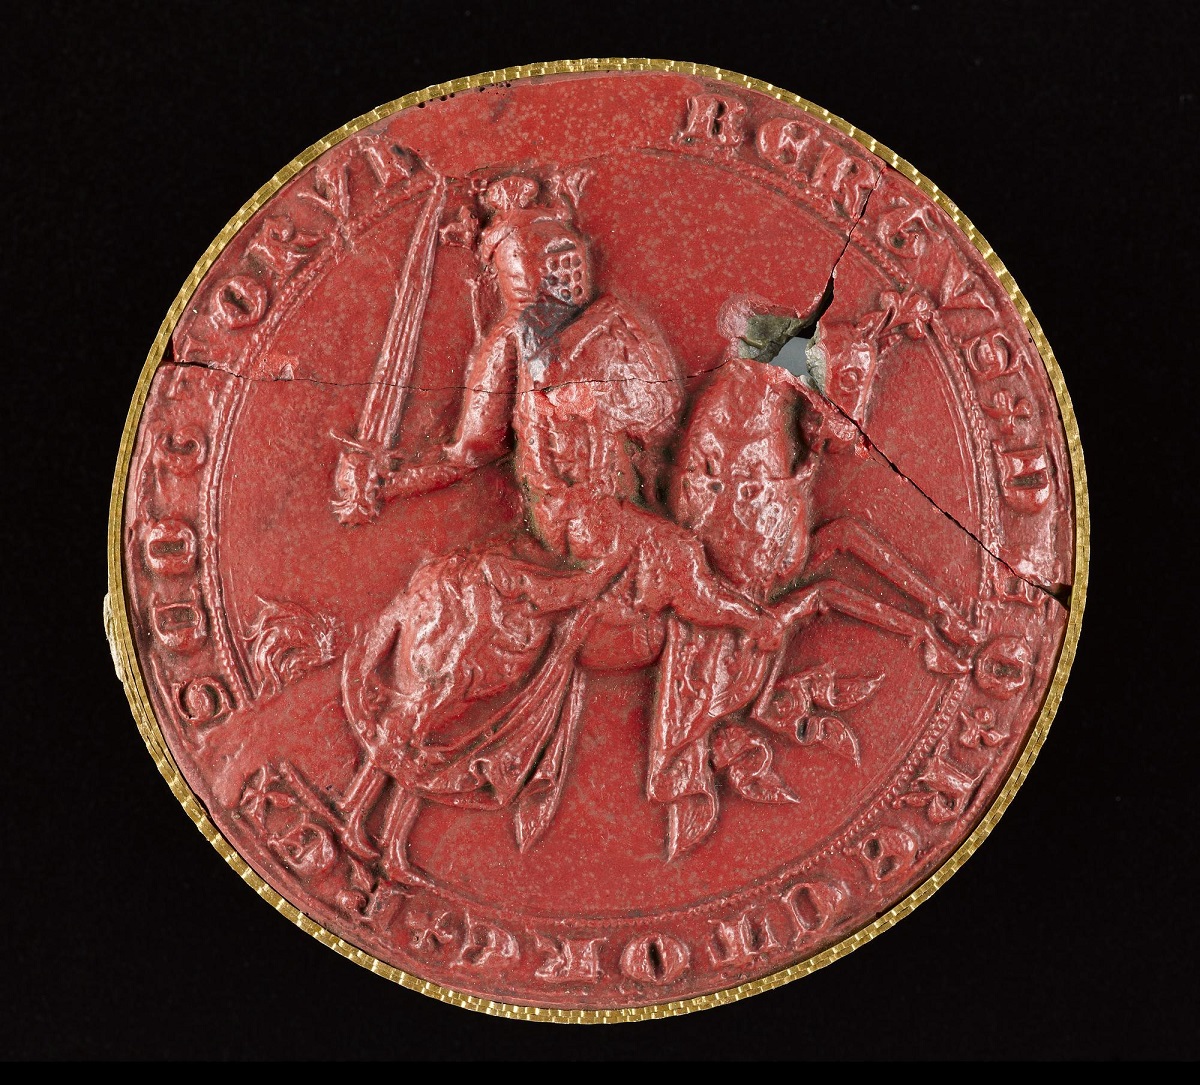 Red, round wax seal with a golden edge. A mounted knight, meant to be Robert Bruce, holds a sword and shield while charging his horse forward.